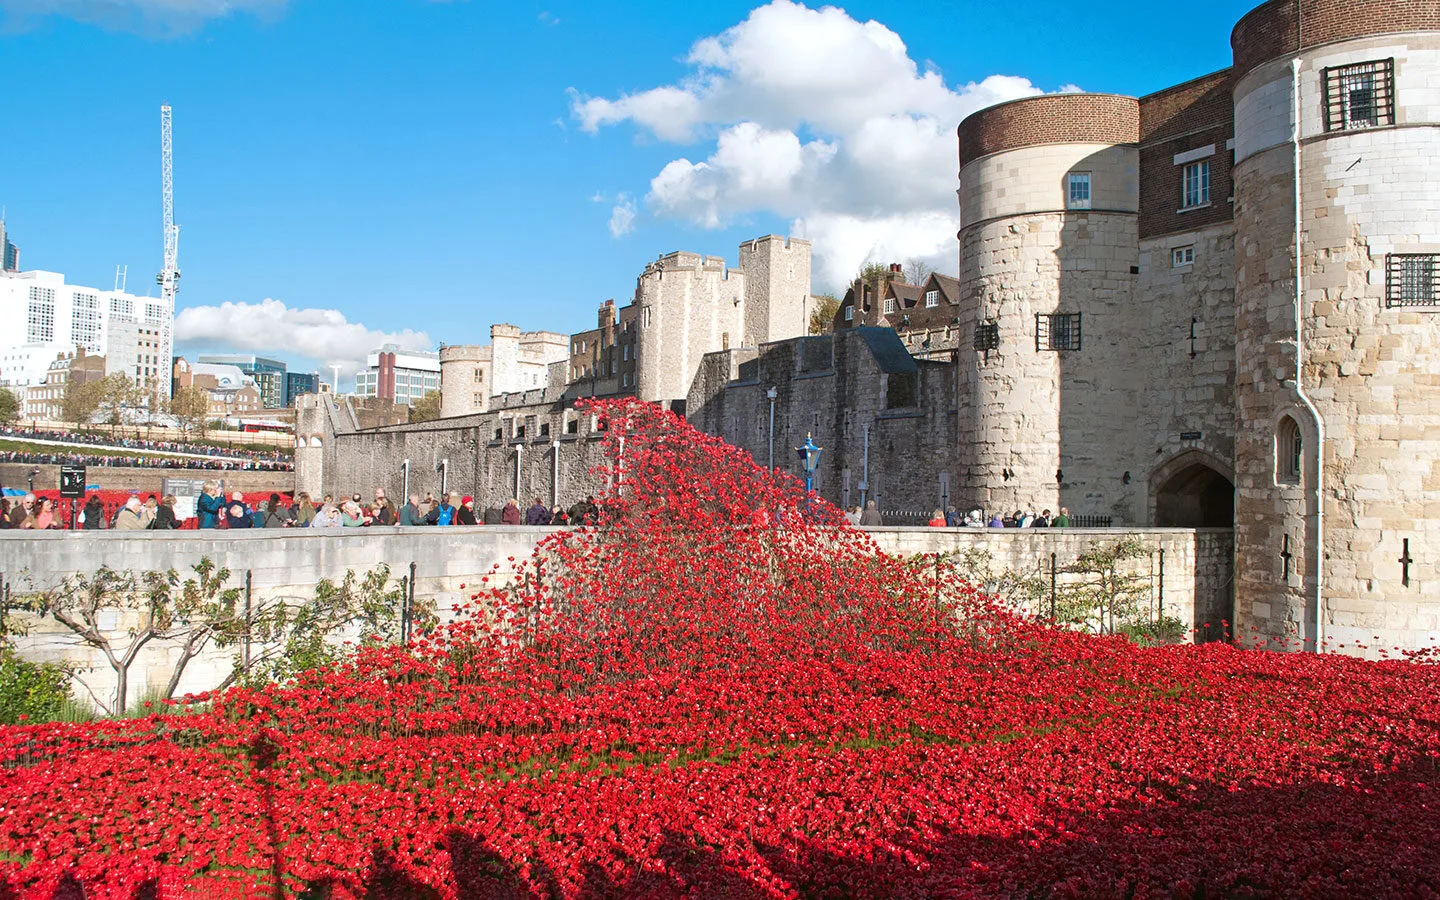 Remembrance poppies at the Tower of London